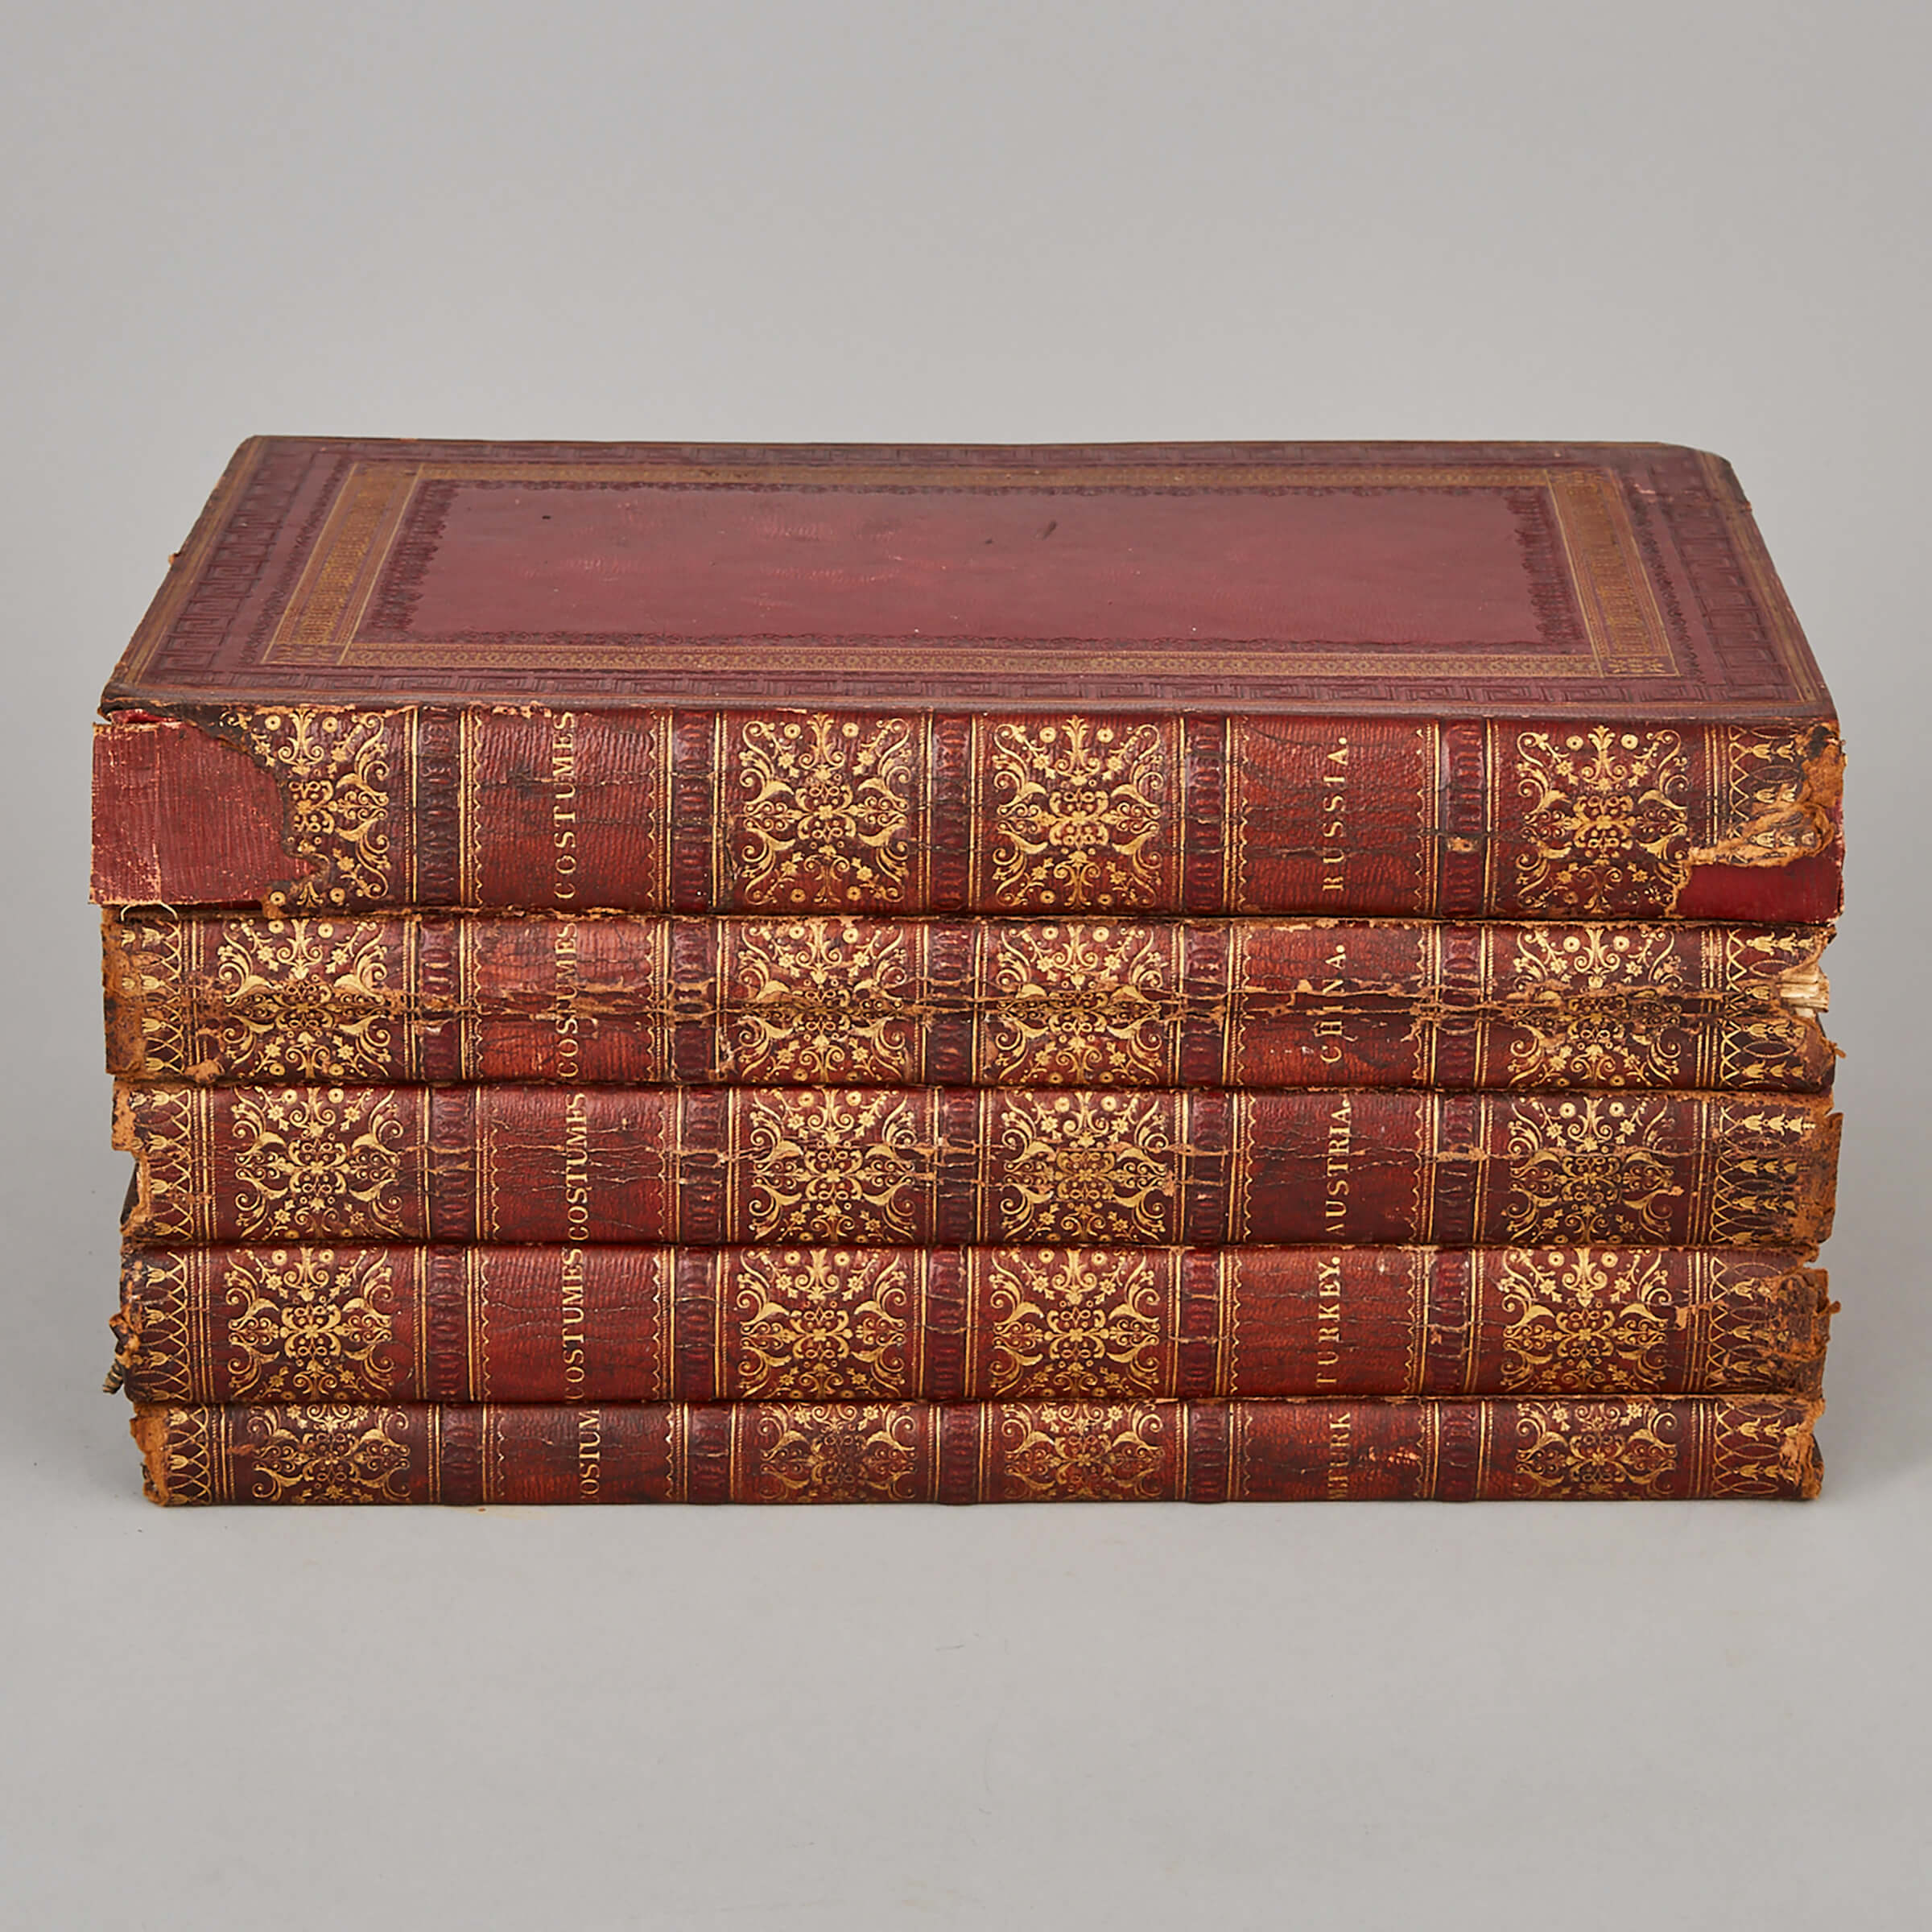 Five Volumes on the Costumes of Various Countries, William Miller and Thomas McLean, London, 1799-1818